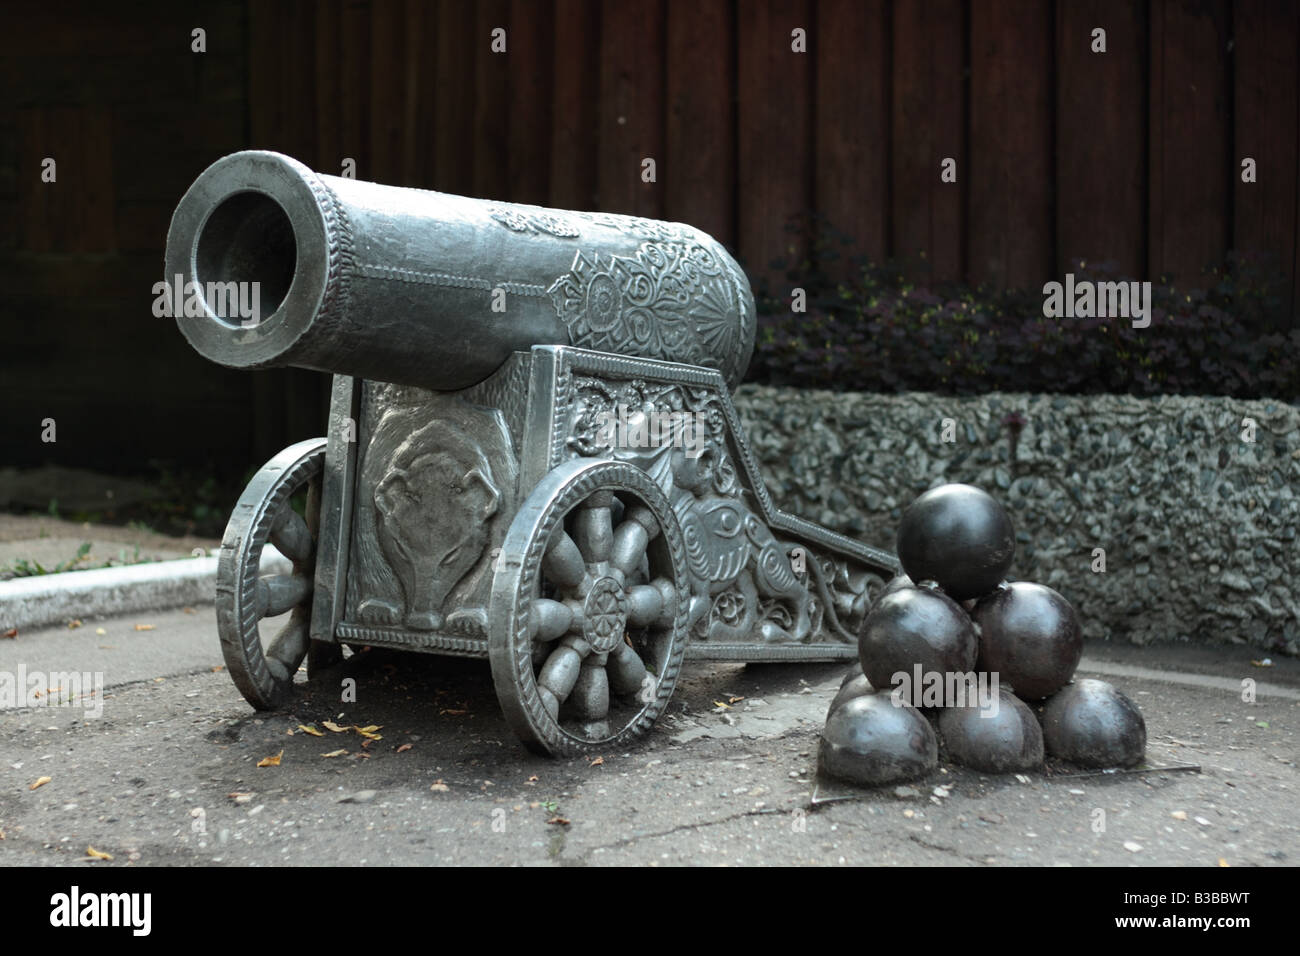 Old cannon at armour exibition in Russia Stock Photo